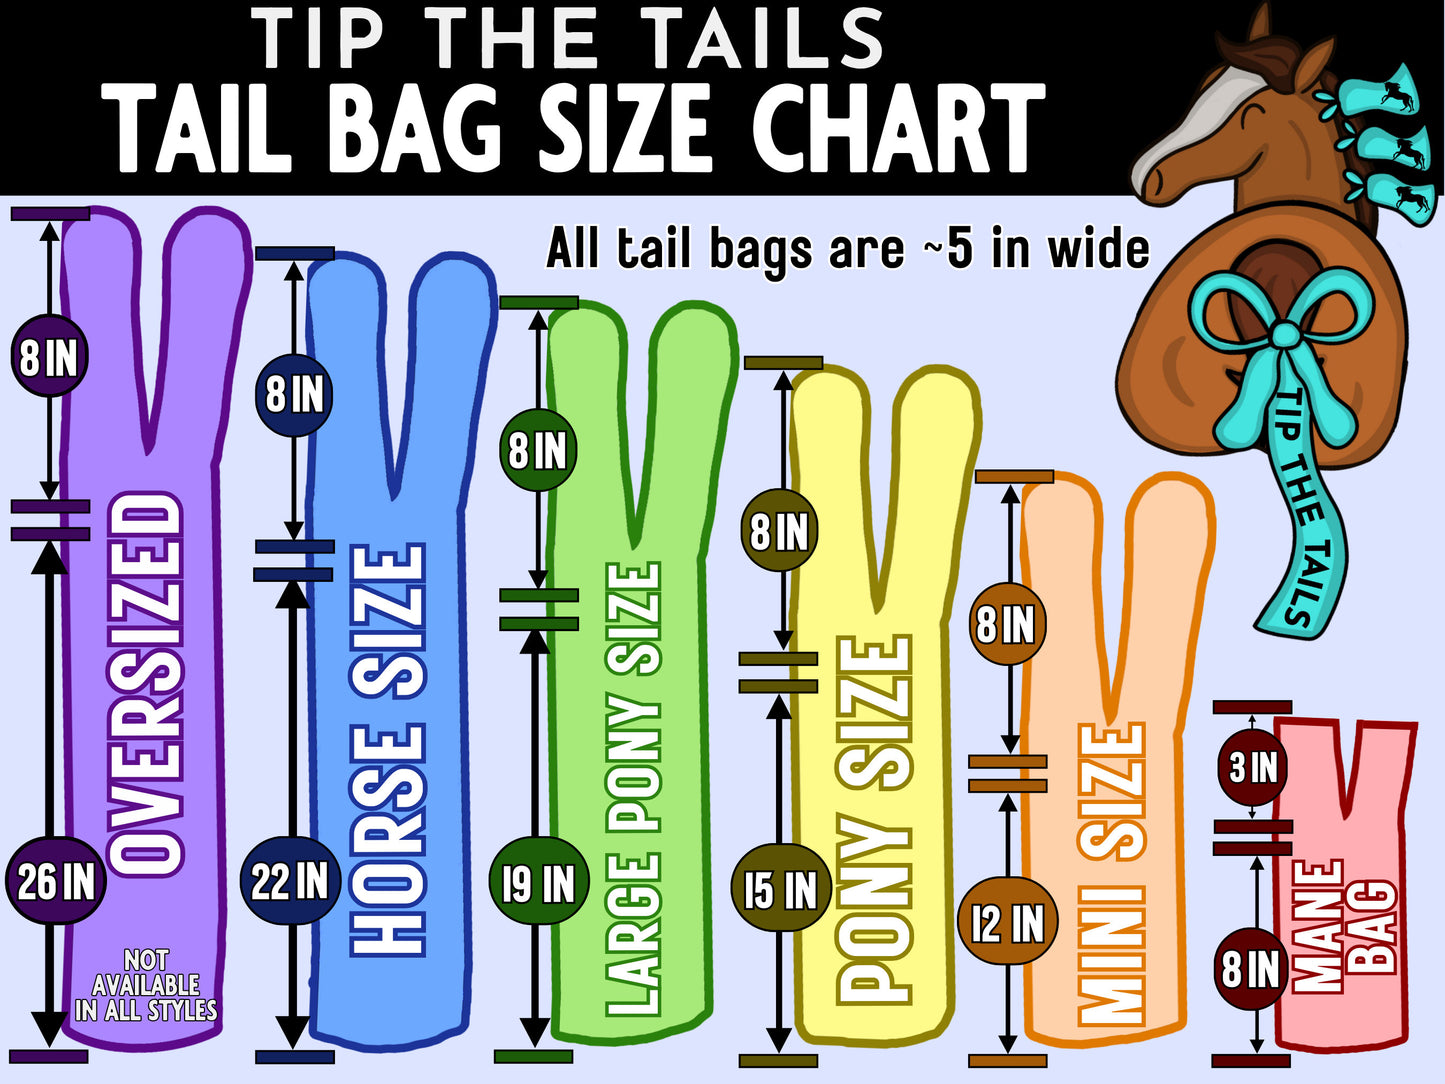 Perfection Equine Tail Bag-Tip The Tails